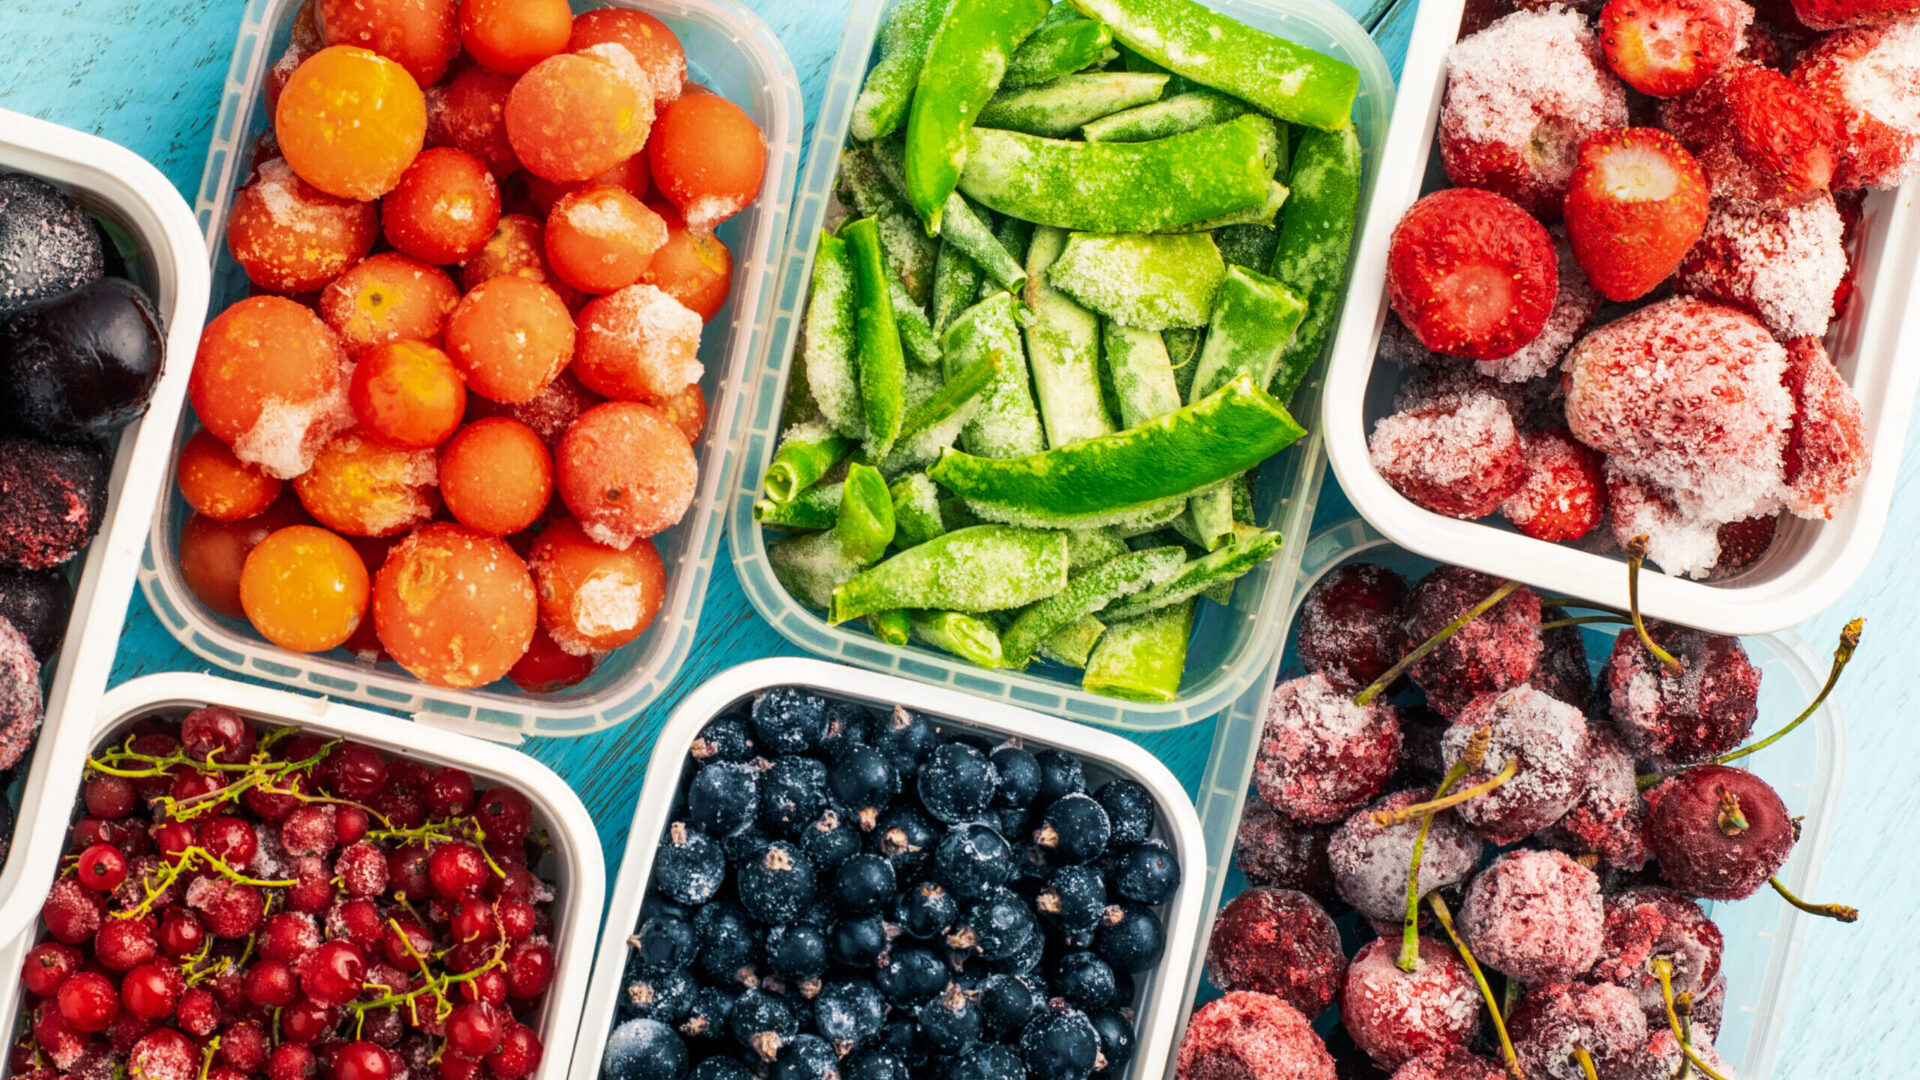 Frozen Fruits and Vegetables Market Future Aspect Analysis and Current Trends by 2017 to 2032